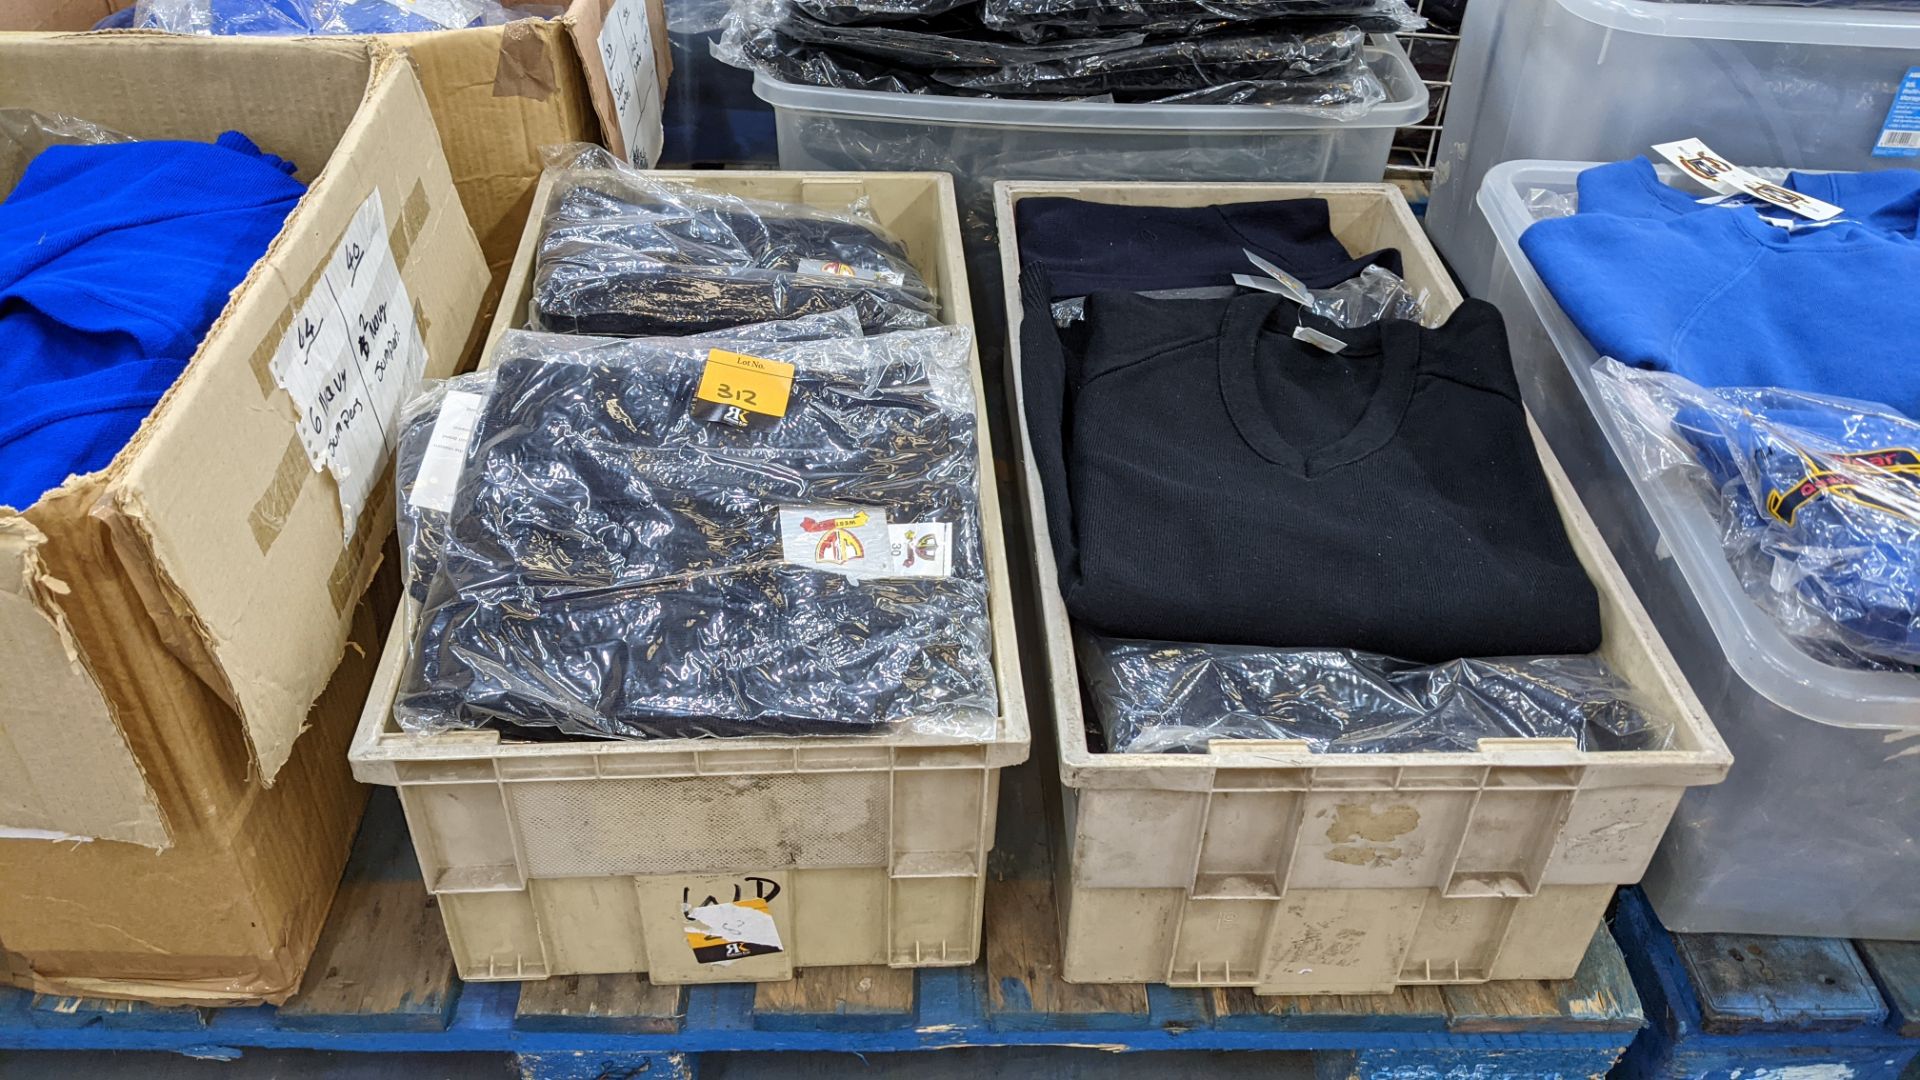 Approx 27 off button up children's navy tops & similar - the contents of 2 crates. NB crates exclud - Image 2 of 5